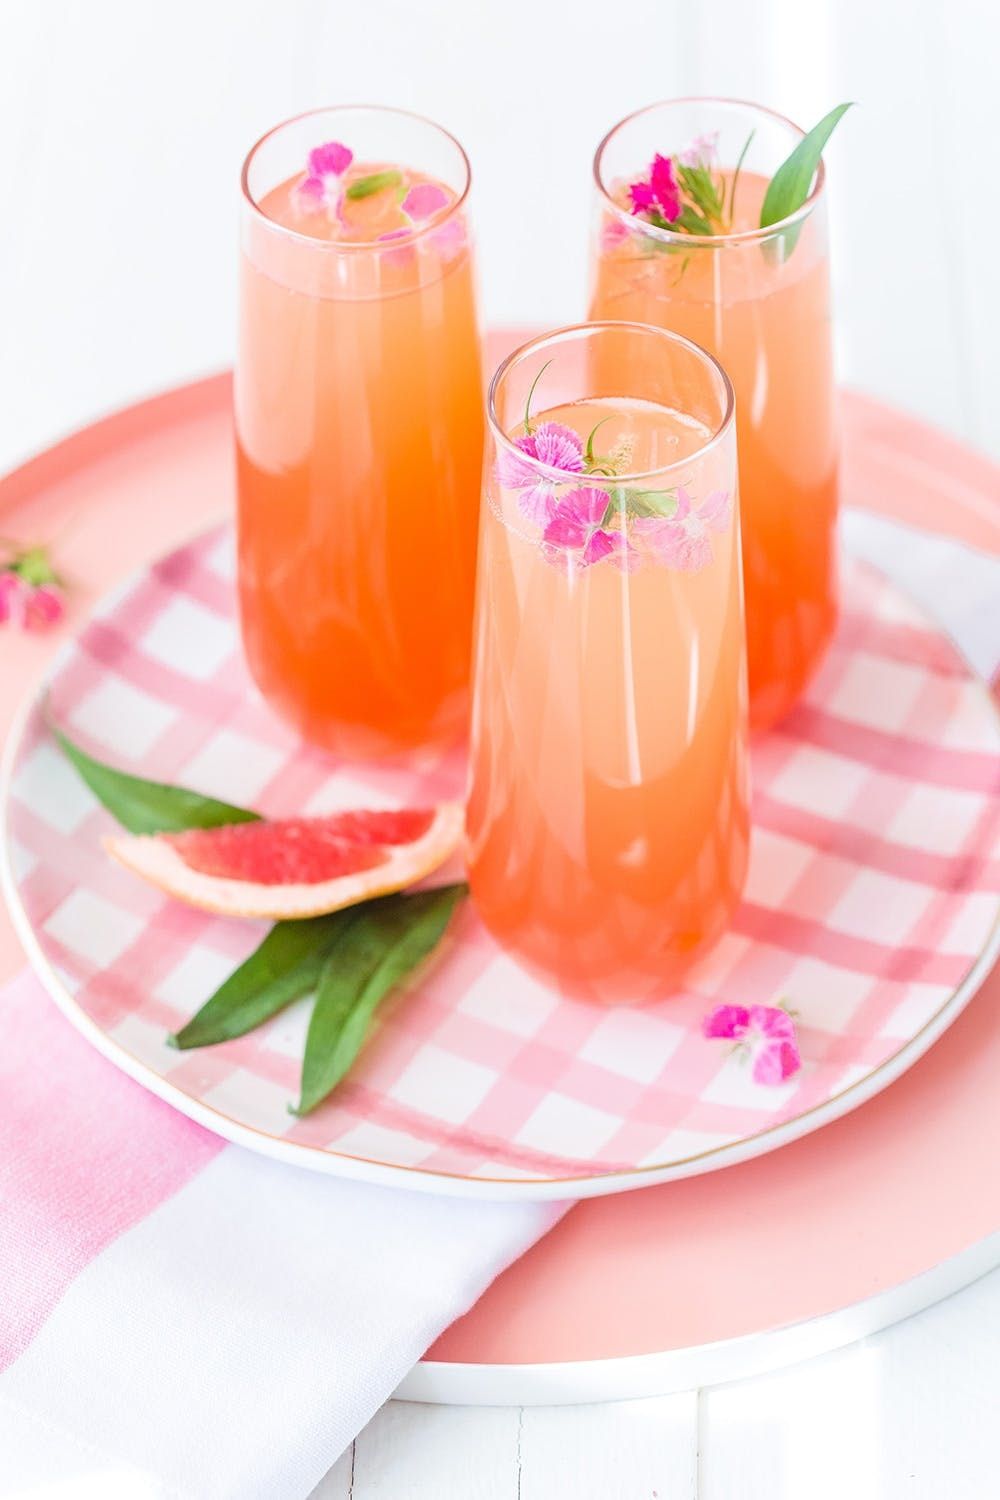 Refreshing Summer Pitcher Drinks and Cocktails for a Crowd